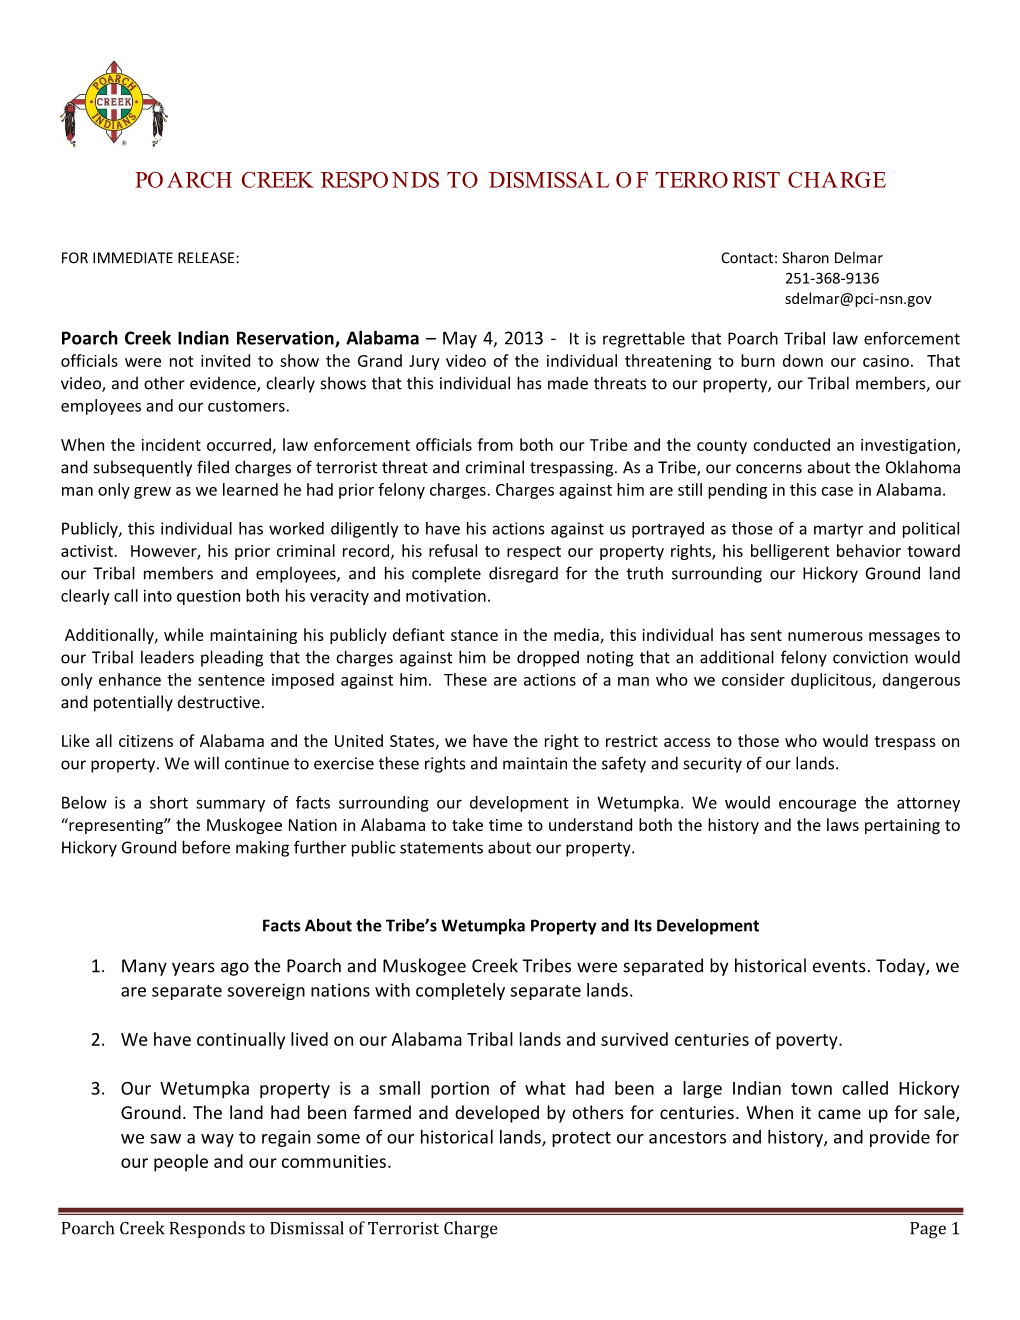 Poarch Creek Responds to Dismissal of Terrorist Charge Page 1